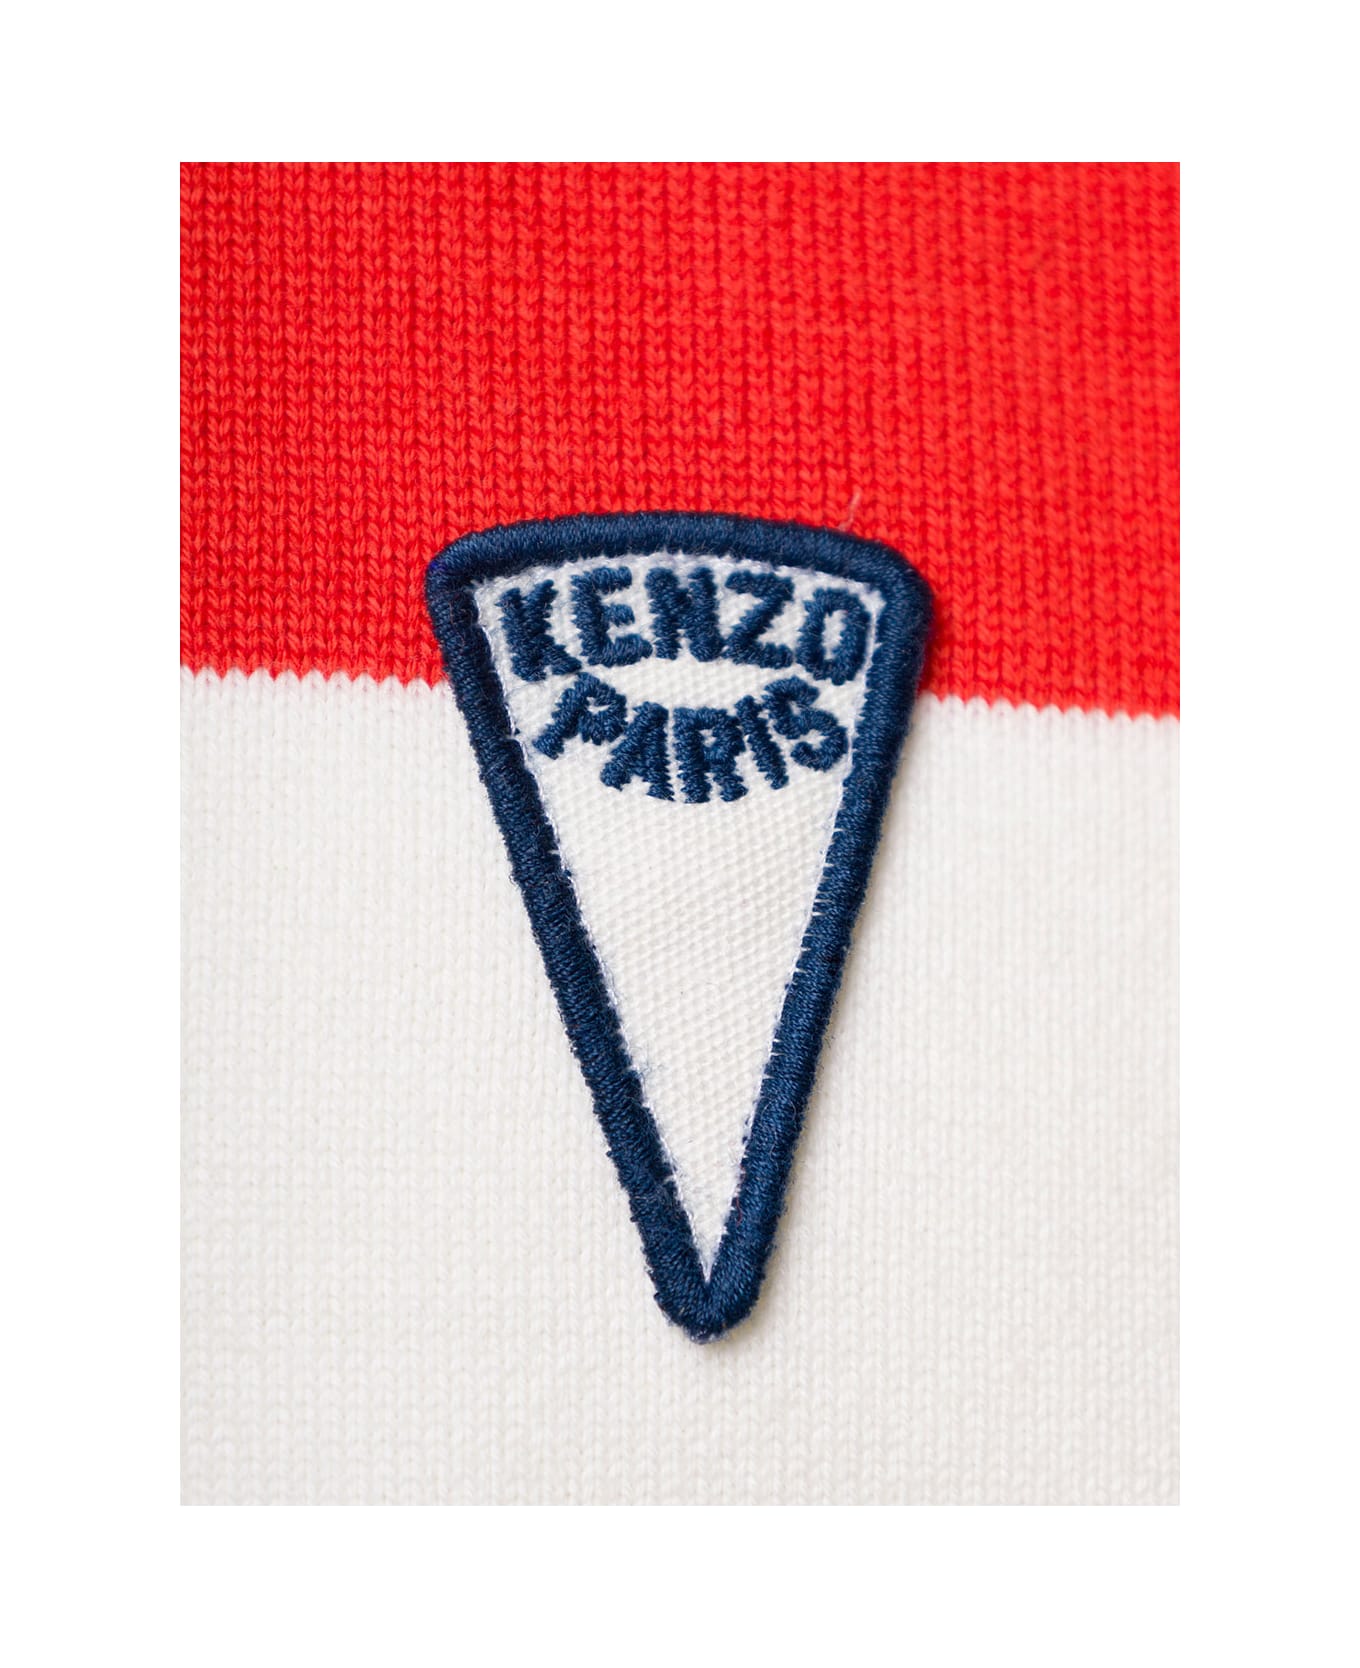 Kenzo White And Red Polo T-shirt With Embroidered Logo In Cotton Man - Red